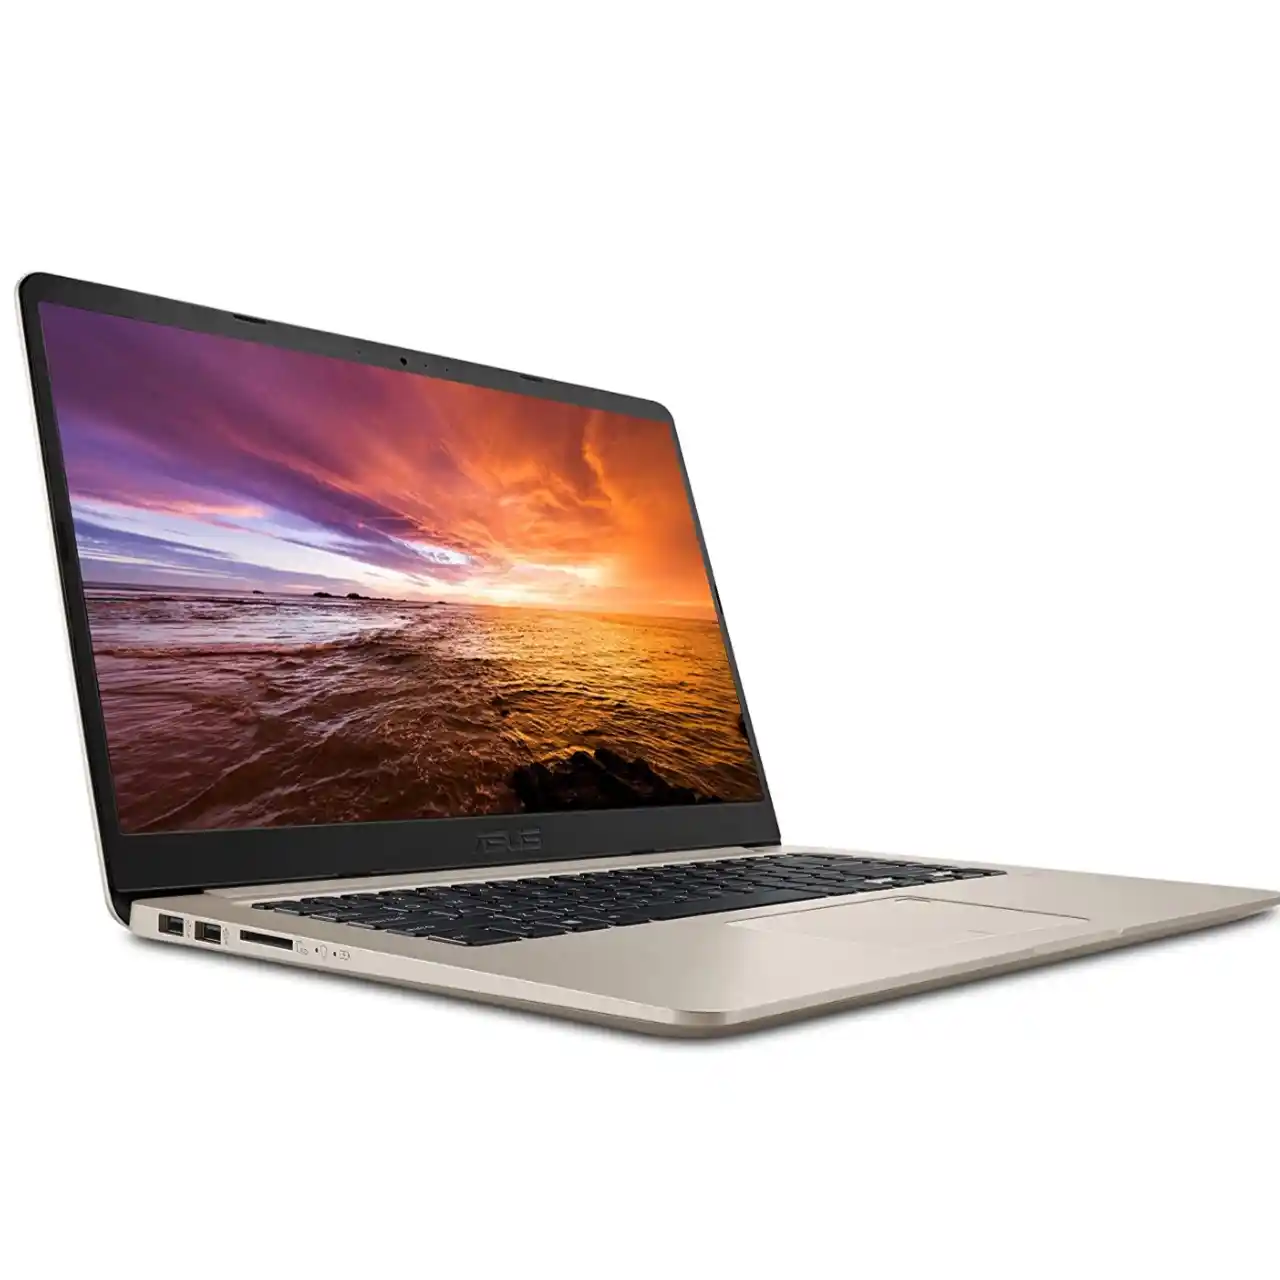 Top 5 Hackintosh Laptop in 2021 - [ Good Performance and Compatibility ]